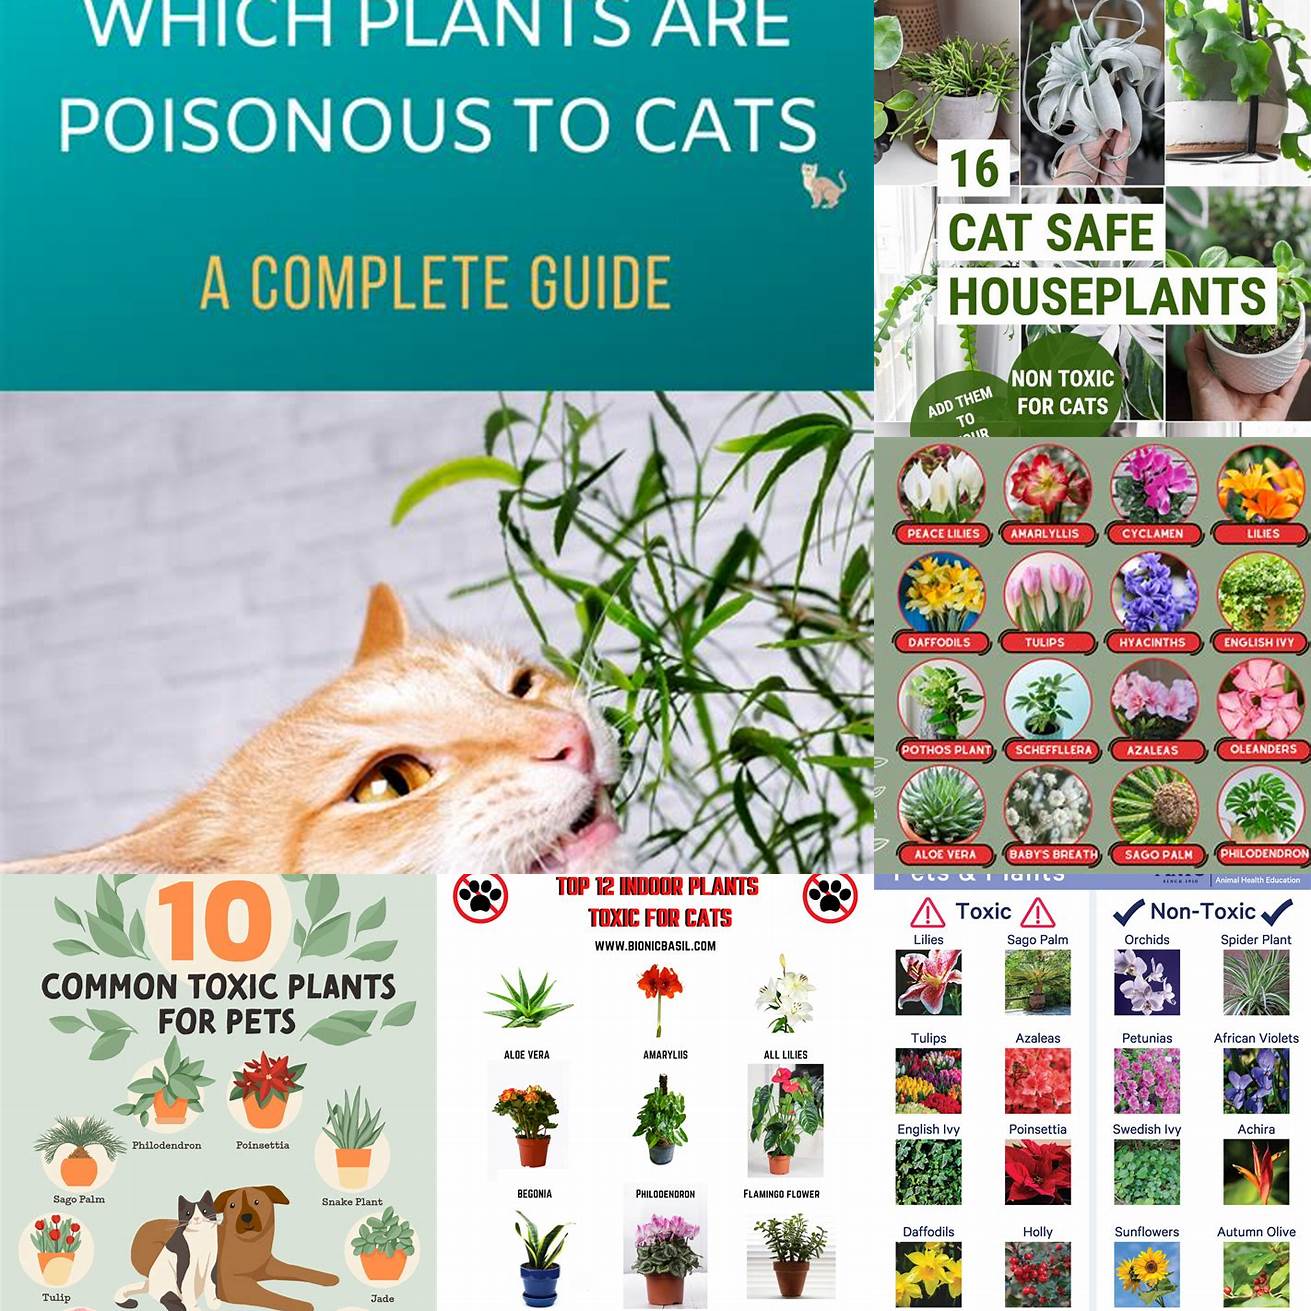 Q Are there any other plants that are toxic to cats A Yes there are many other plants that can be toxic to cats including lilies aloe vera and snake plants